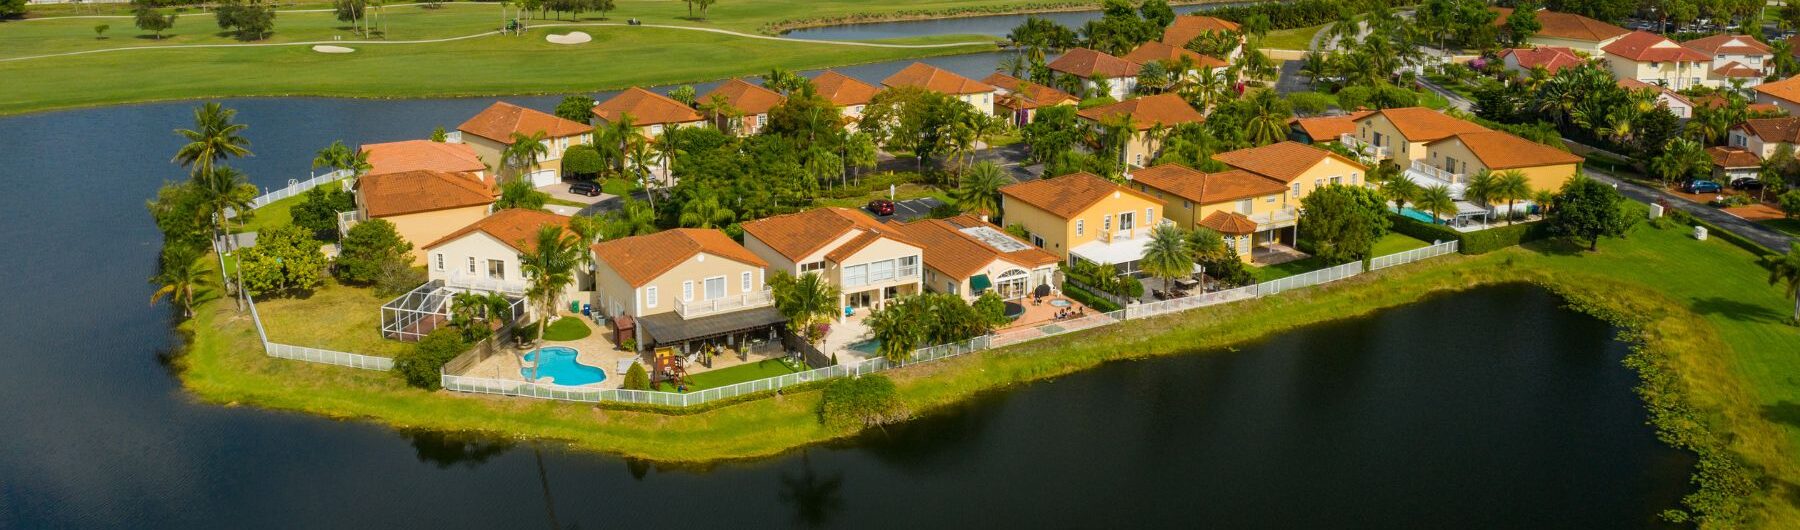 florida homes backing up to a pond